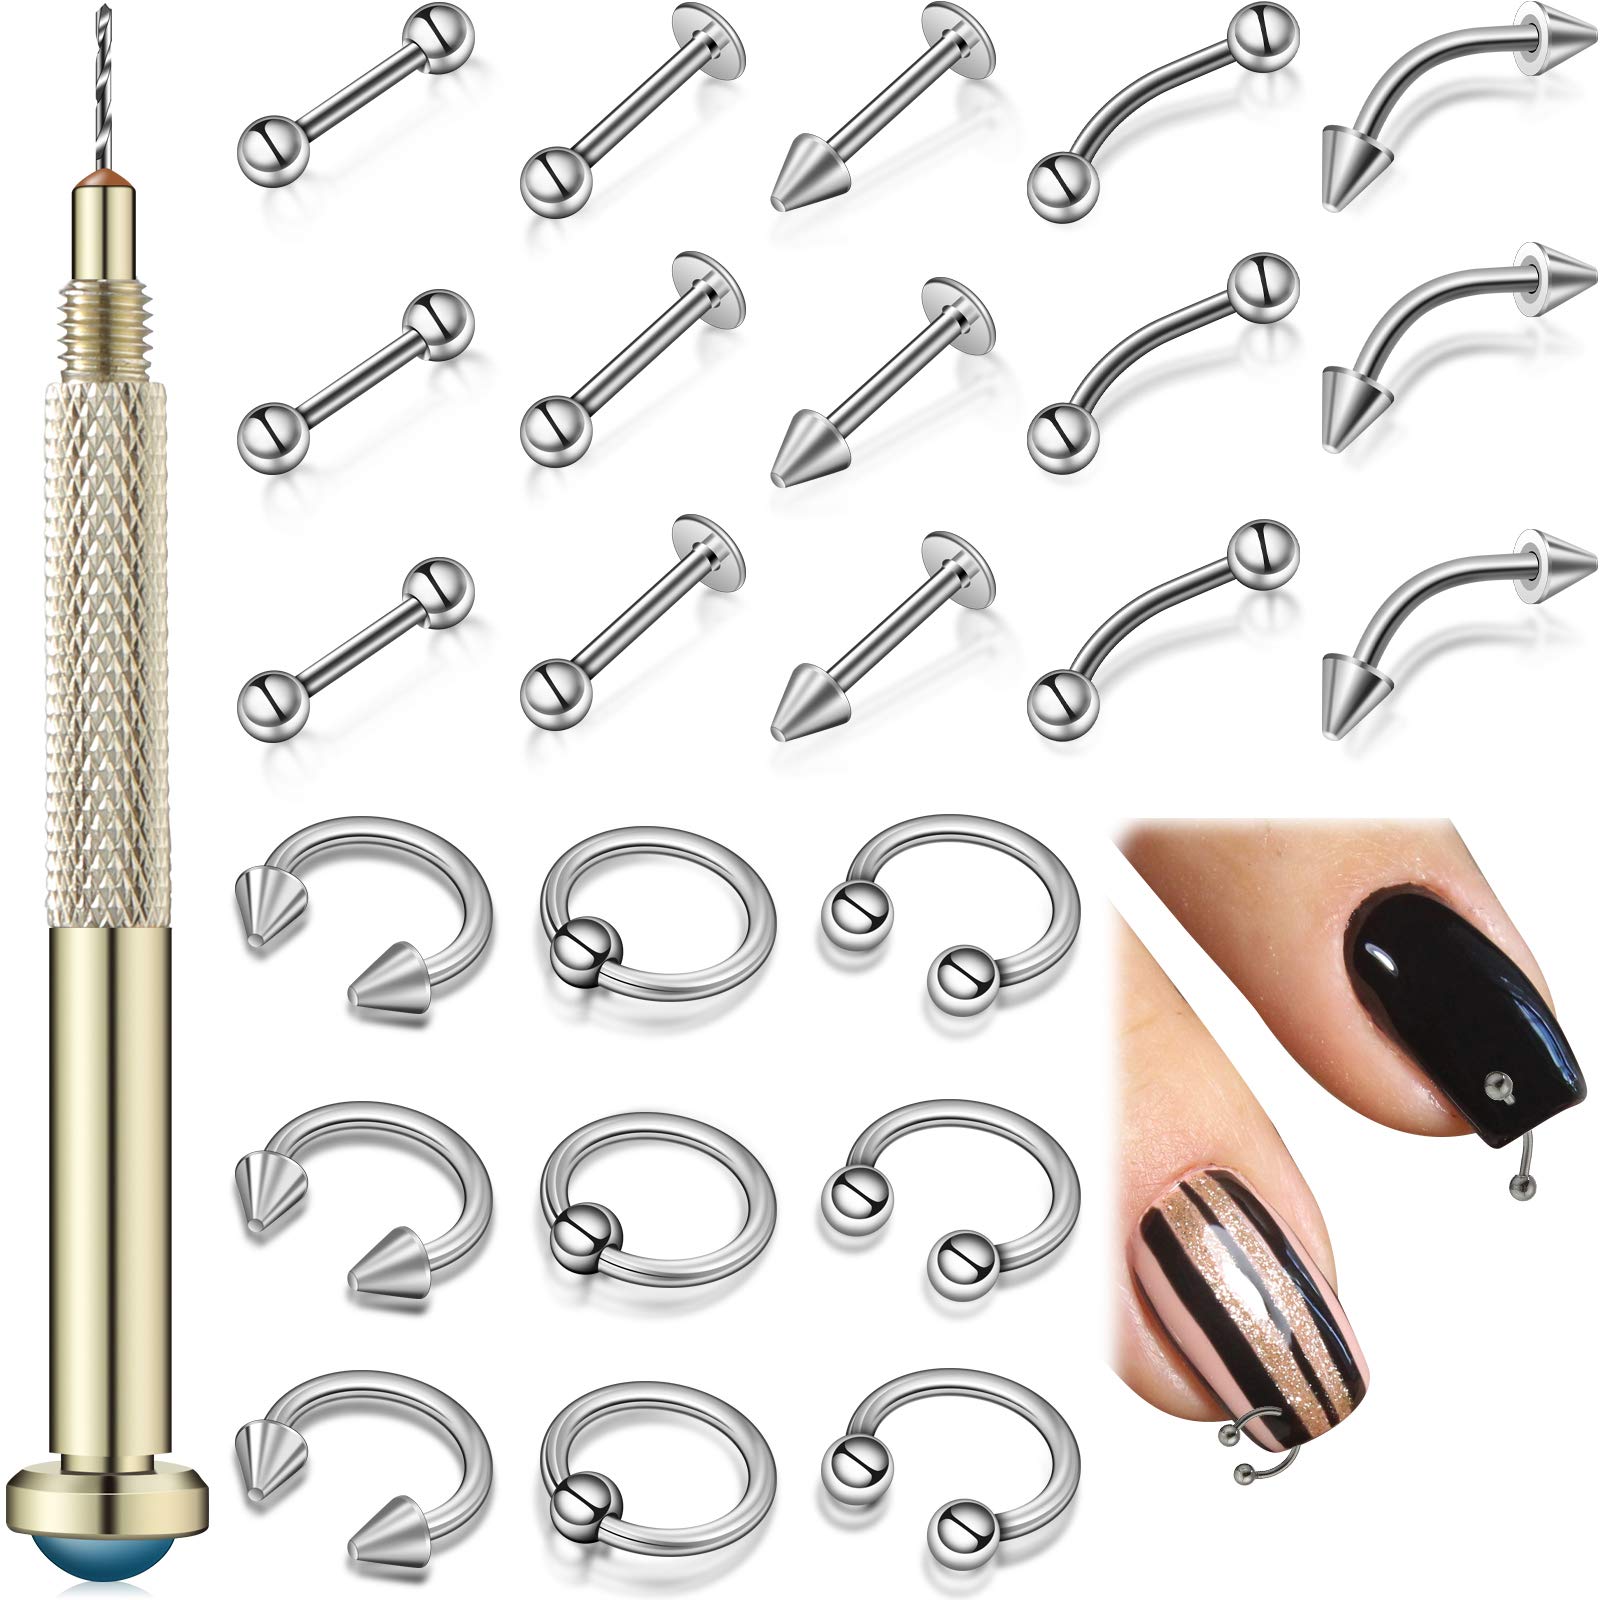 VictorieLei Silver: Dangle Nail Charm Art Piercing Tool Hand Drill and  Beaded Rings for Tips, Acrylic, Gels and Decorations (Silver) : Amazon.in:  Home Improvement